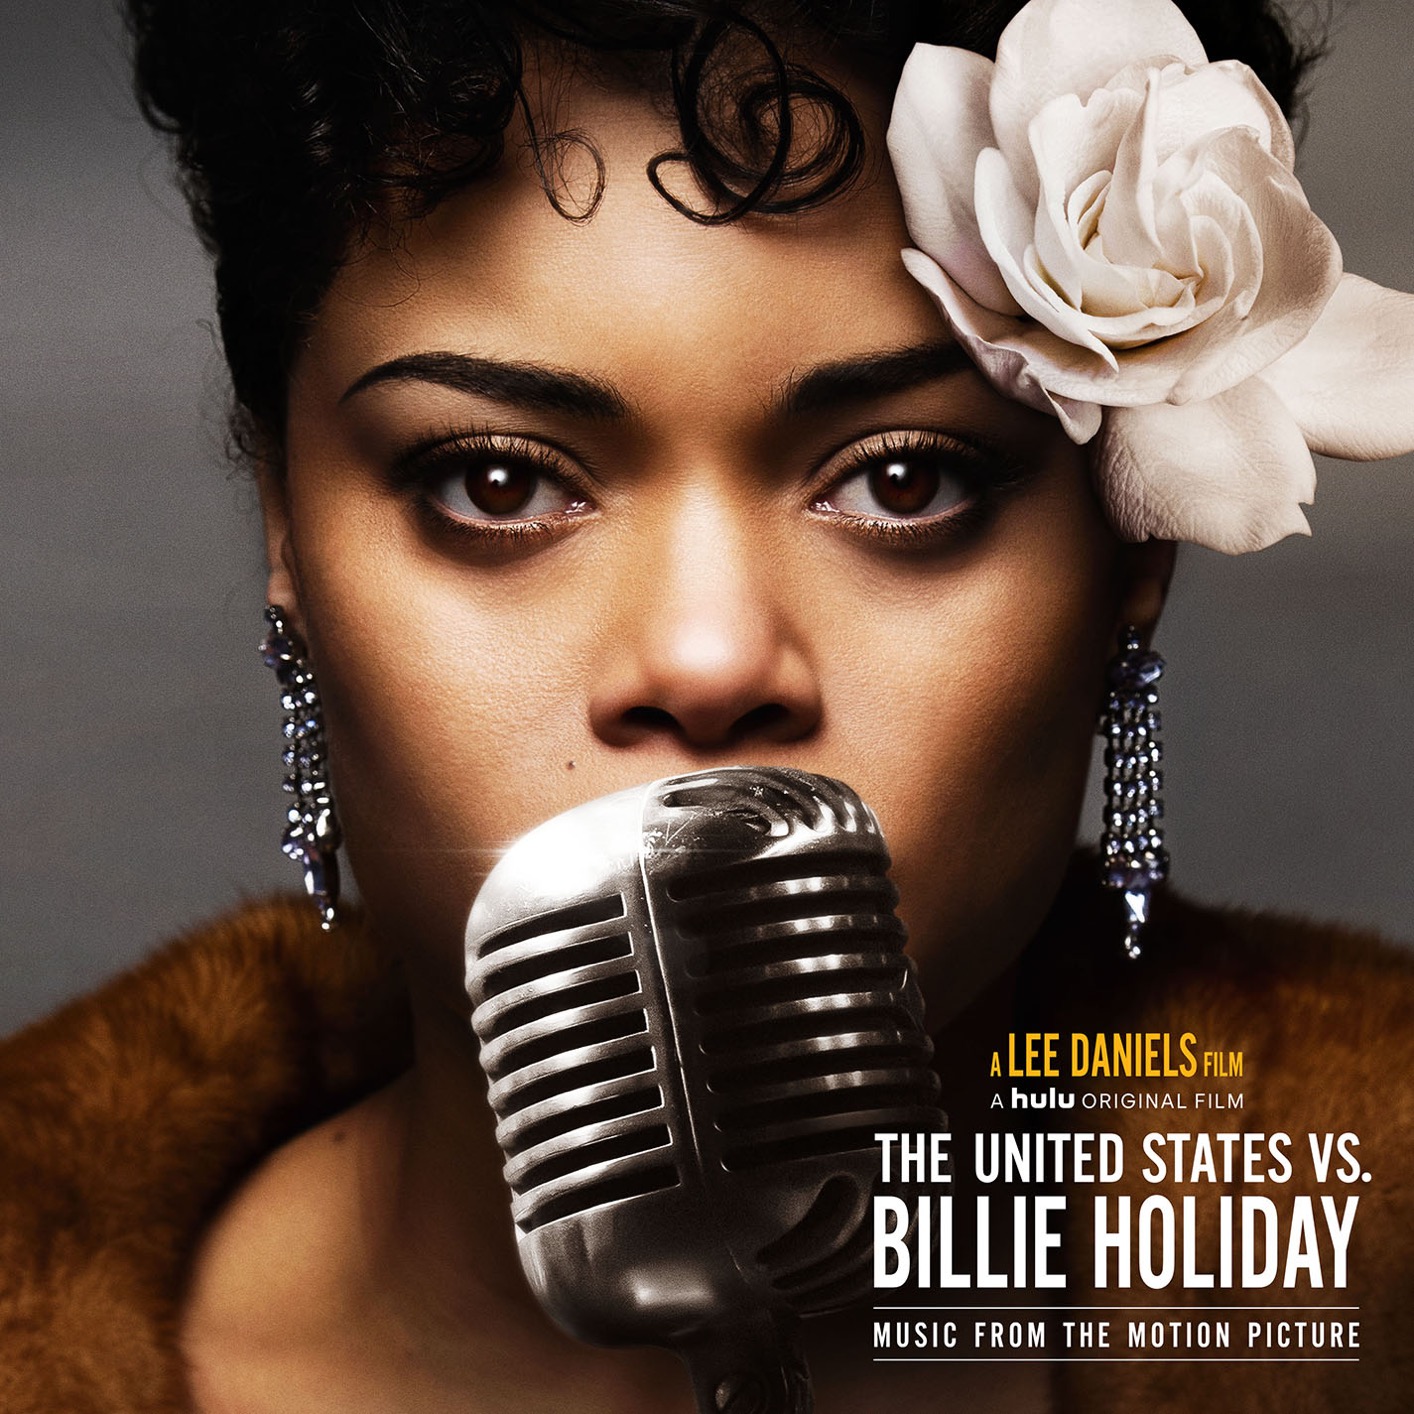 Andra Day – The United States vs. Billie Holiday (Music from the Motion Picture) (2021) [FLAC 24bit/96kHz]